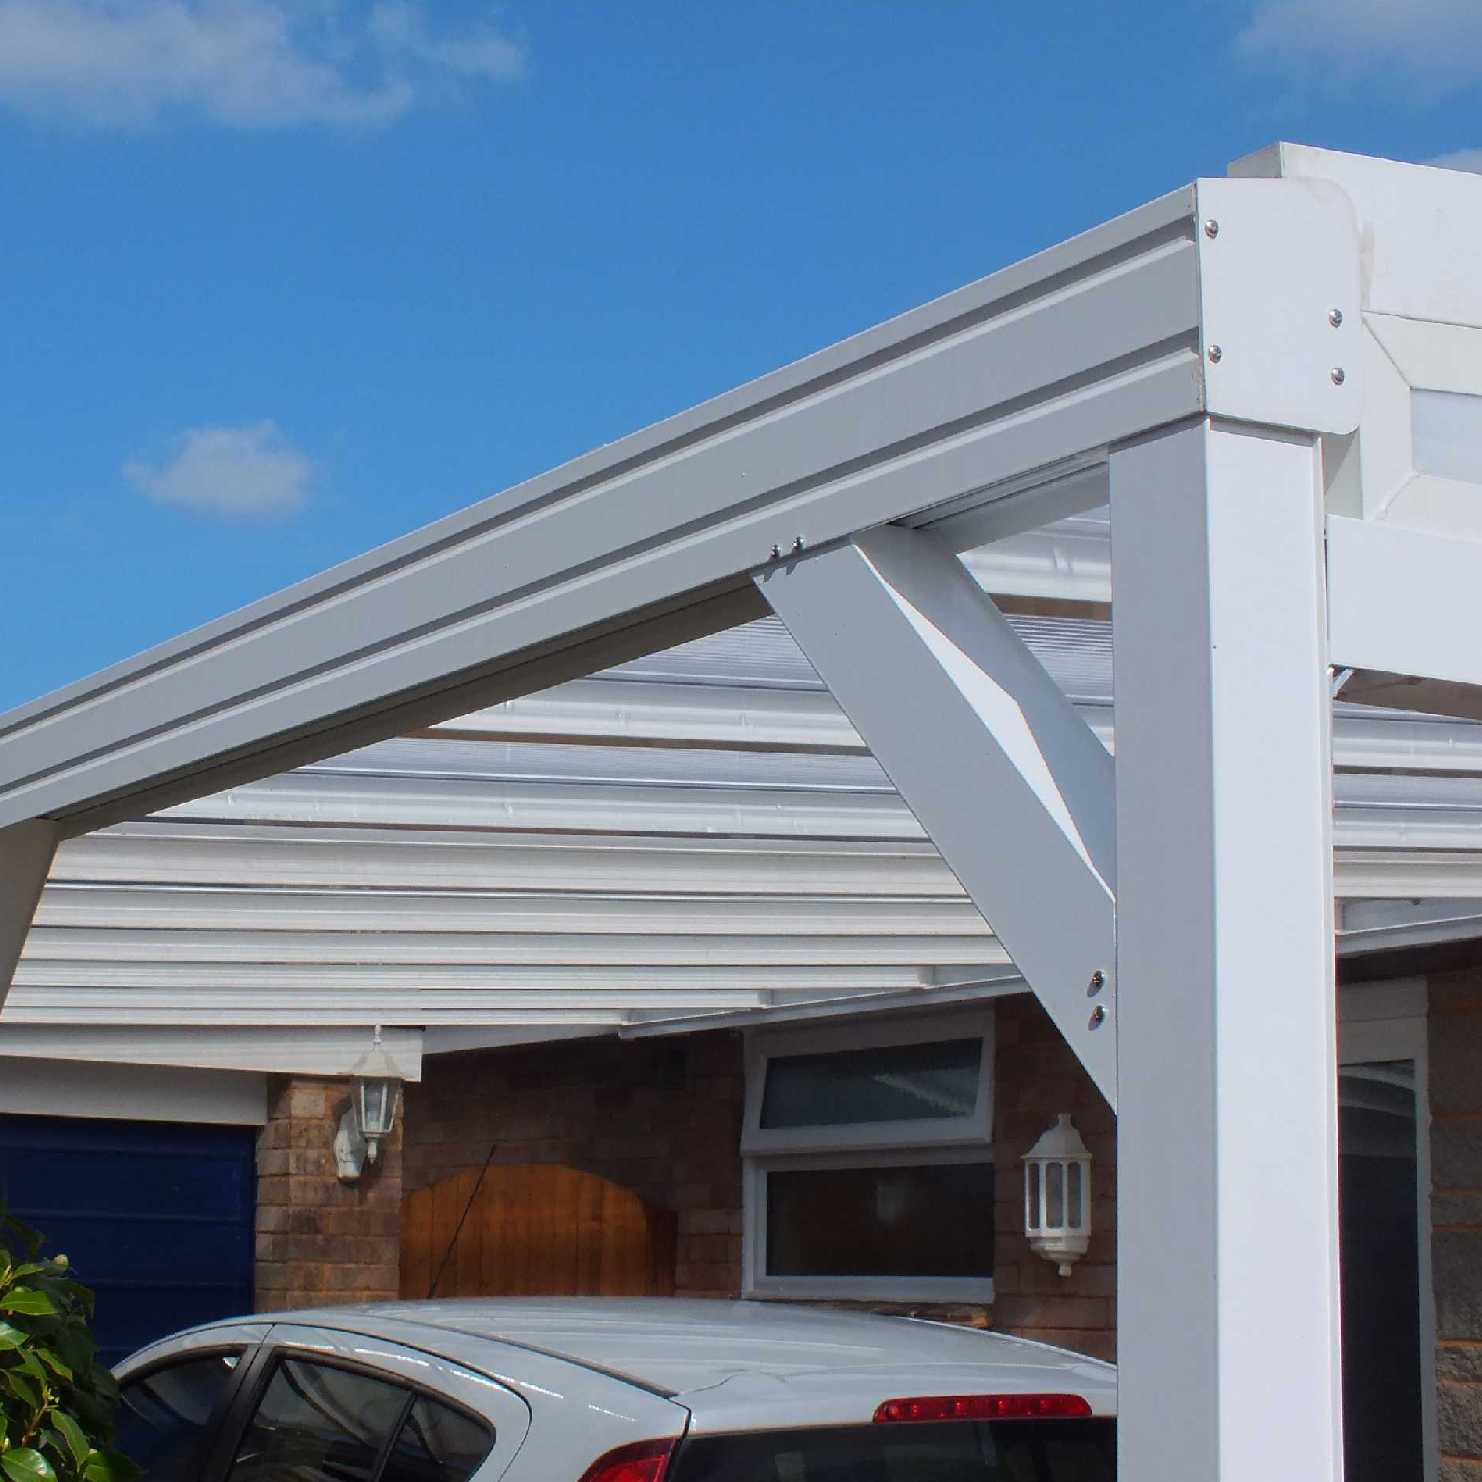 Great deals on Omega Smart Lean-To Canopy, White with 16mm Polycarbonate Glazing - 2.1m (W) x 1.5m (P), (2) Supporting Posts